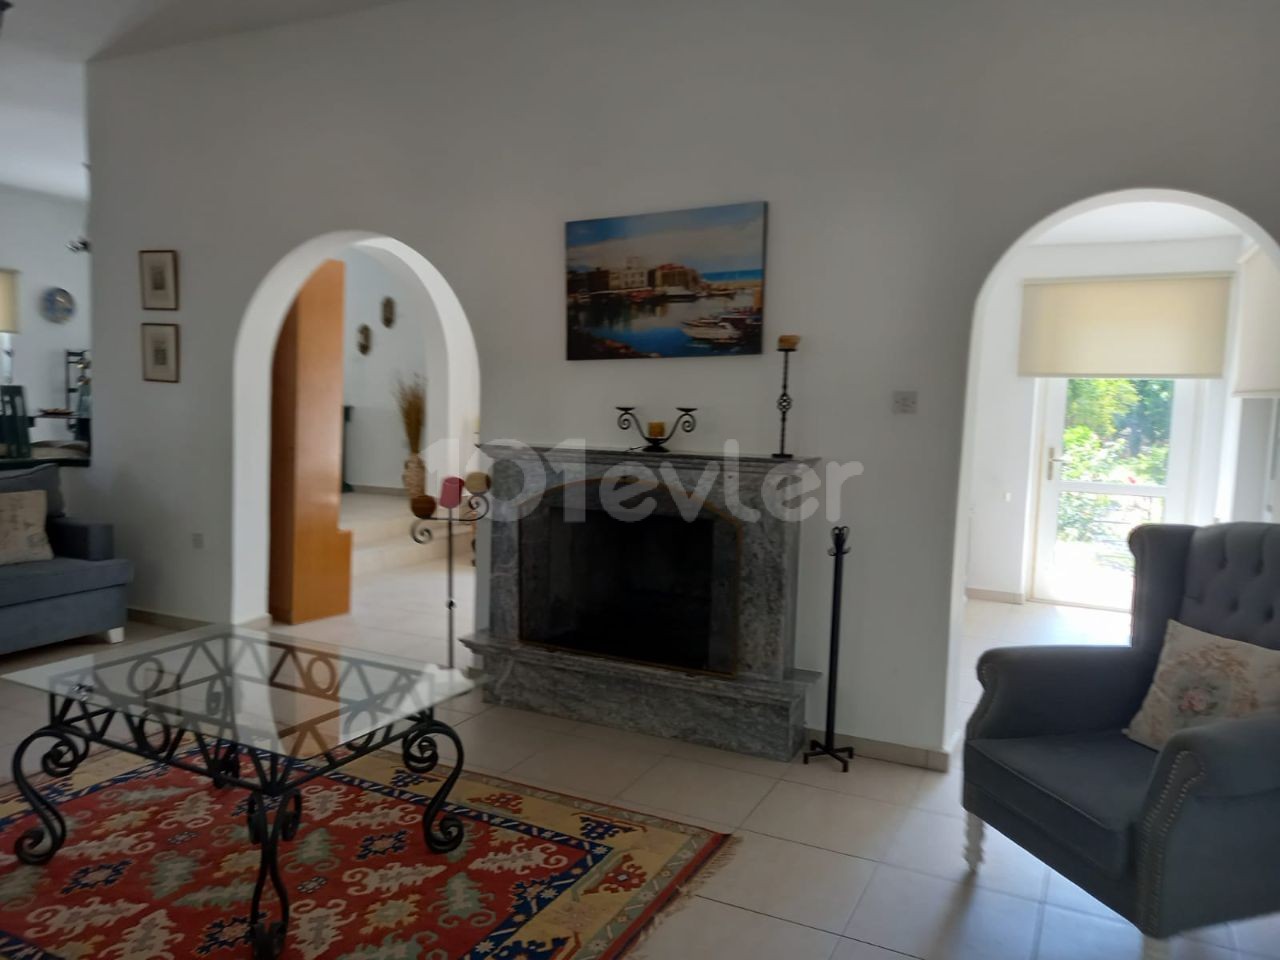 Villa for rent in the Edremit